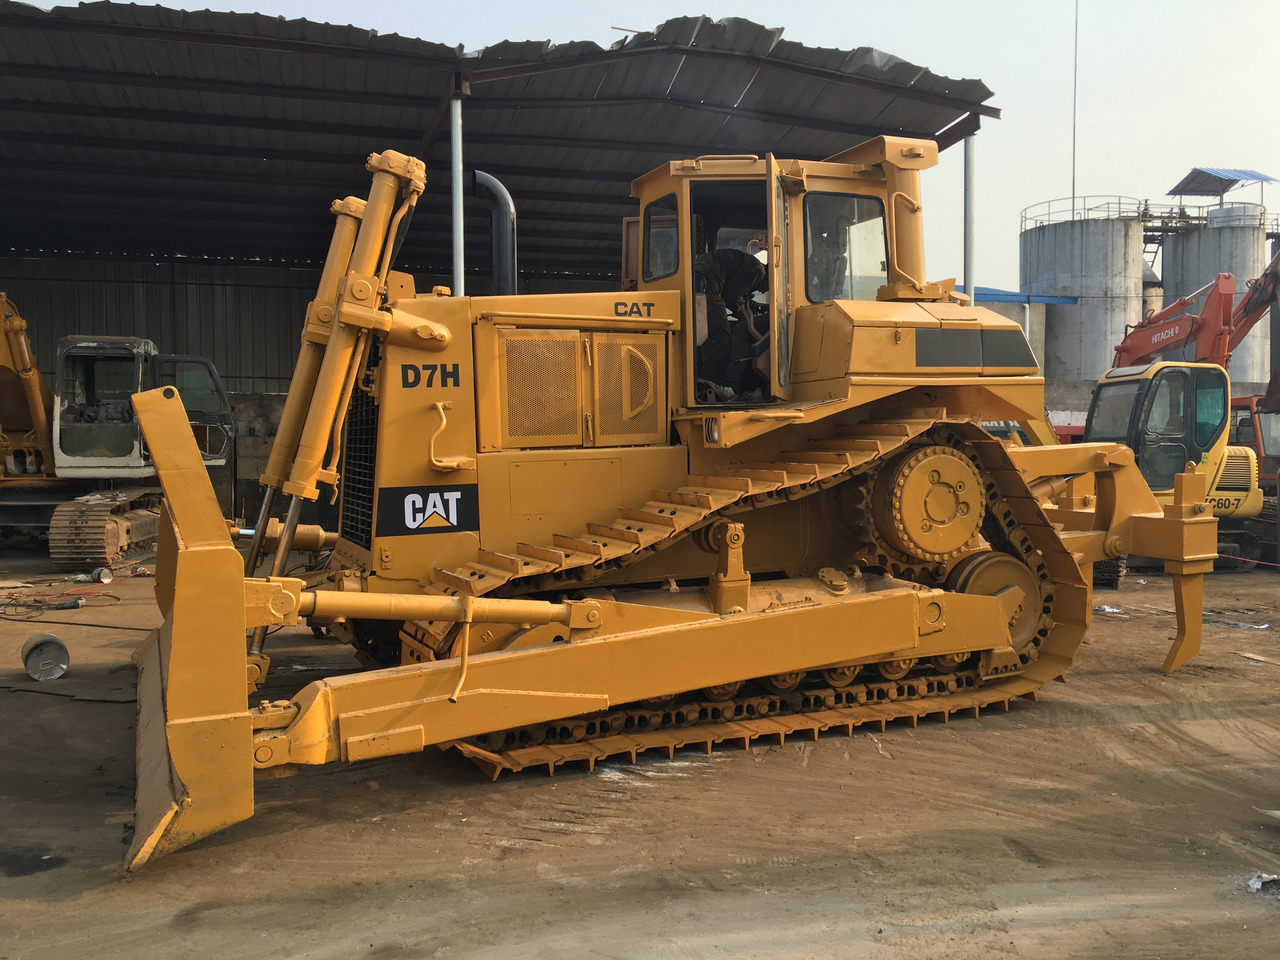 Nowy Spycharka Famous brand CATERPILLAR D7H in good condition on sale: zdjęcie 5